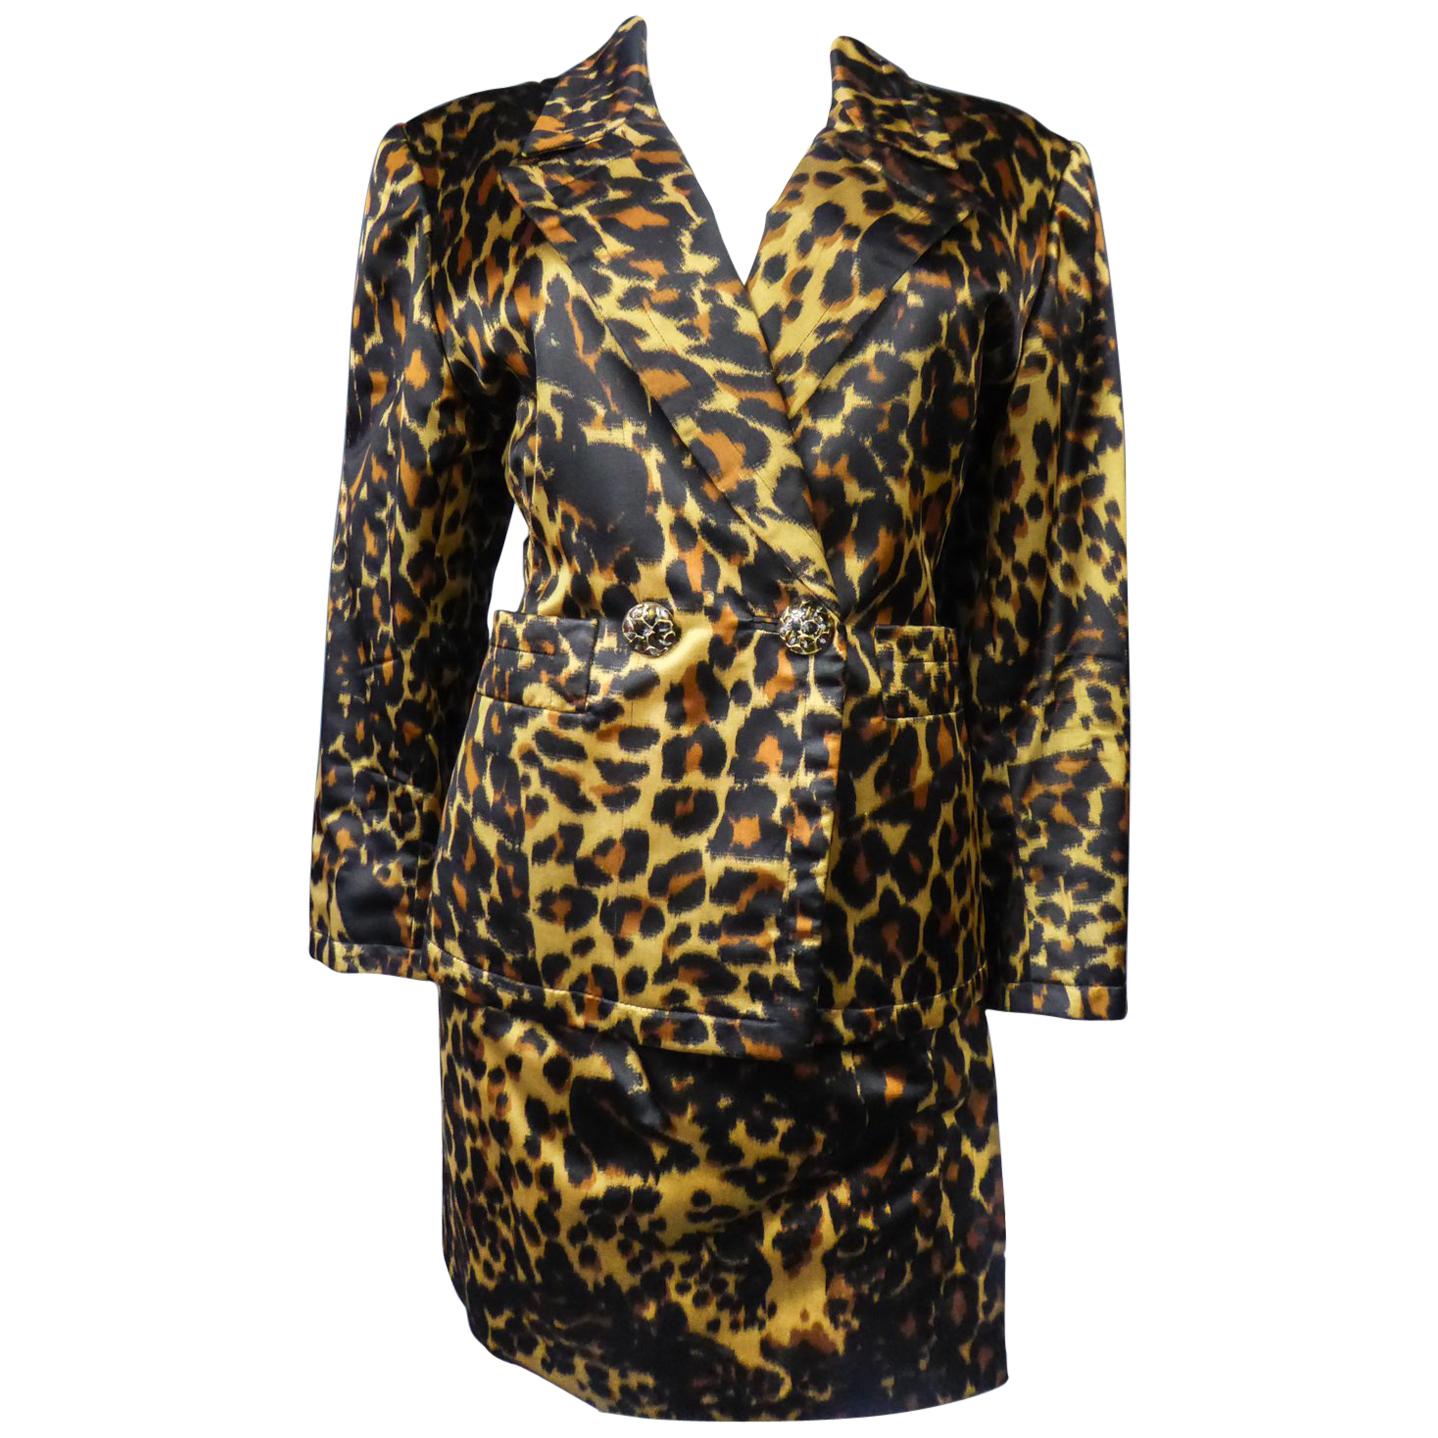 Yves Saint Laurent Printed Panther Satin (attributed to) Skirt Suit Circa 1990